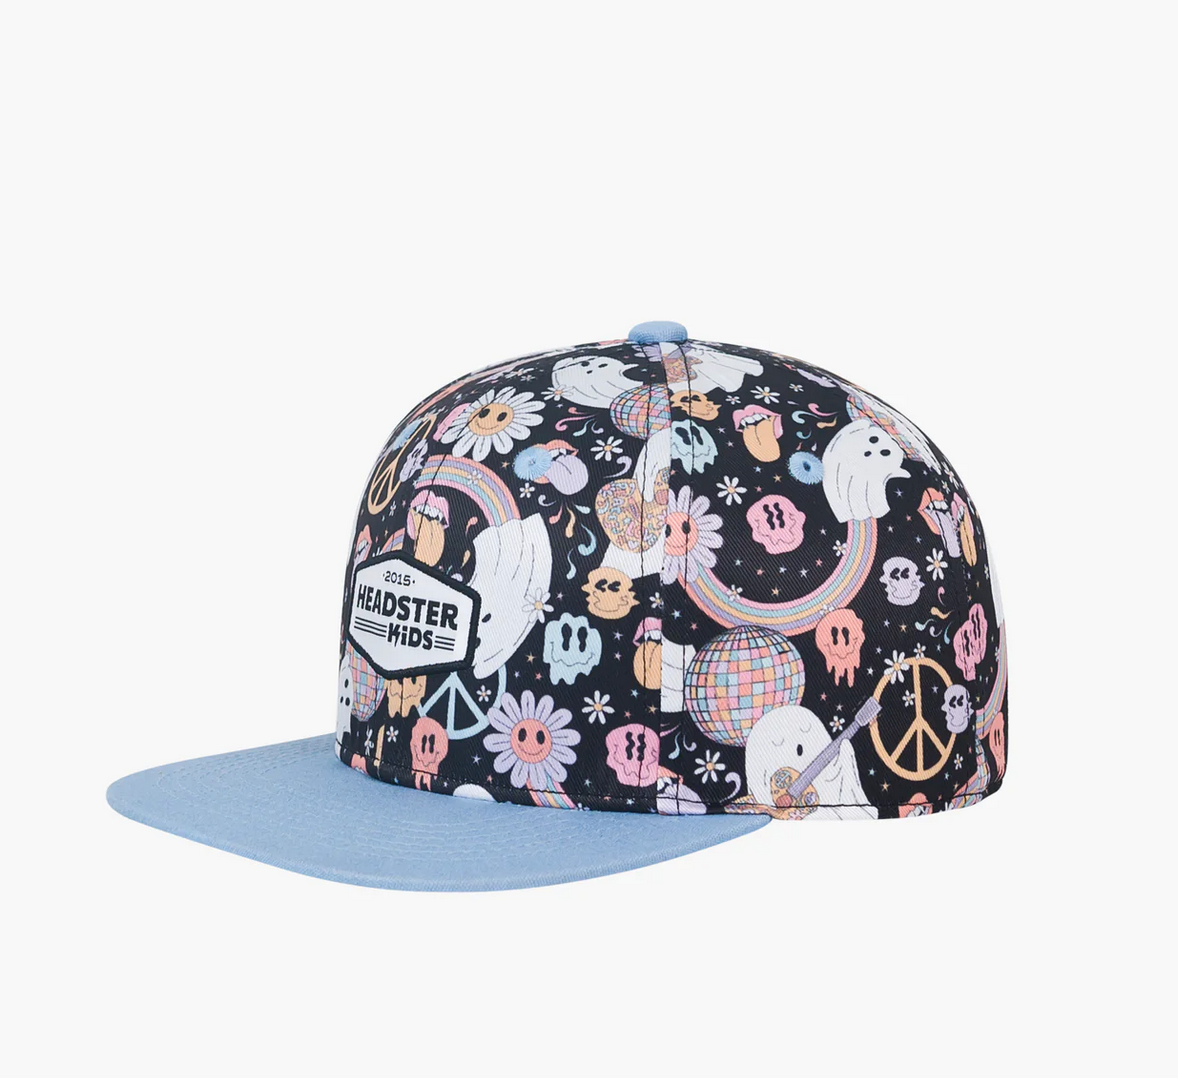 Headster Boo Snapback Hat